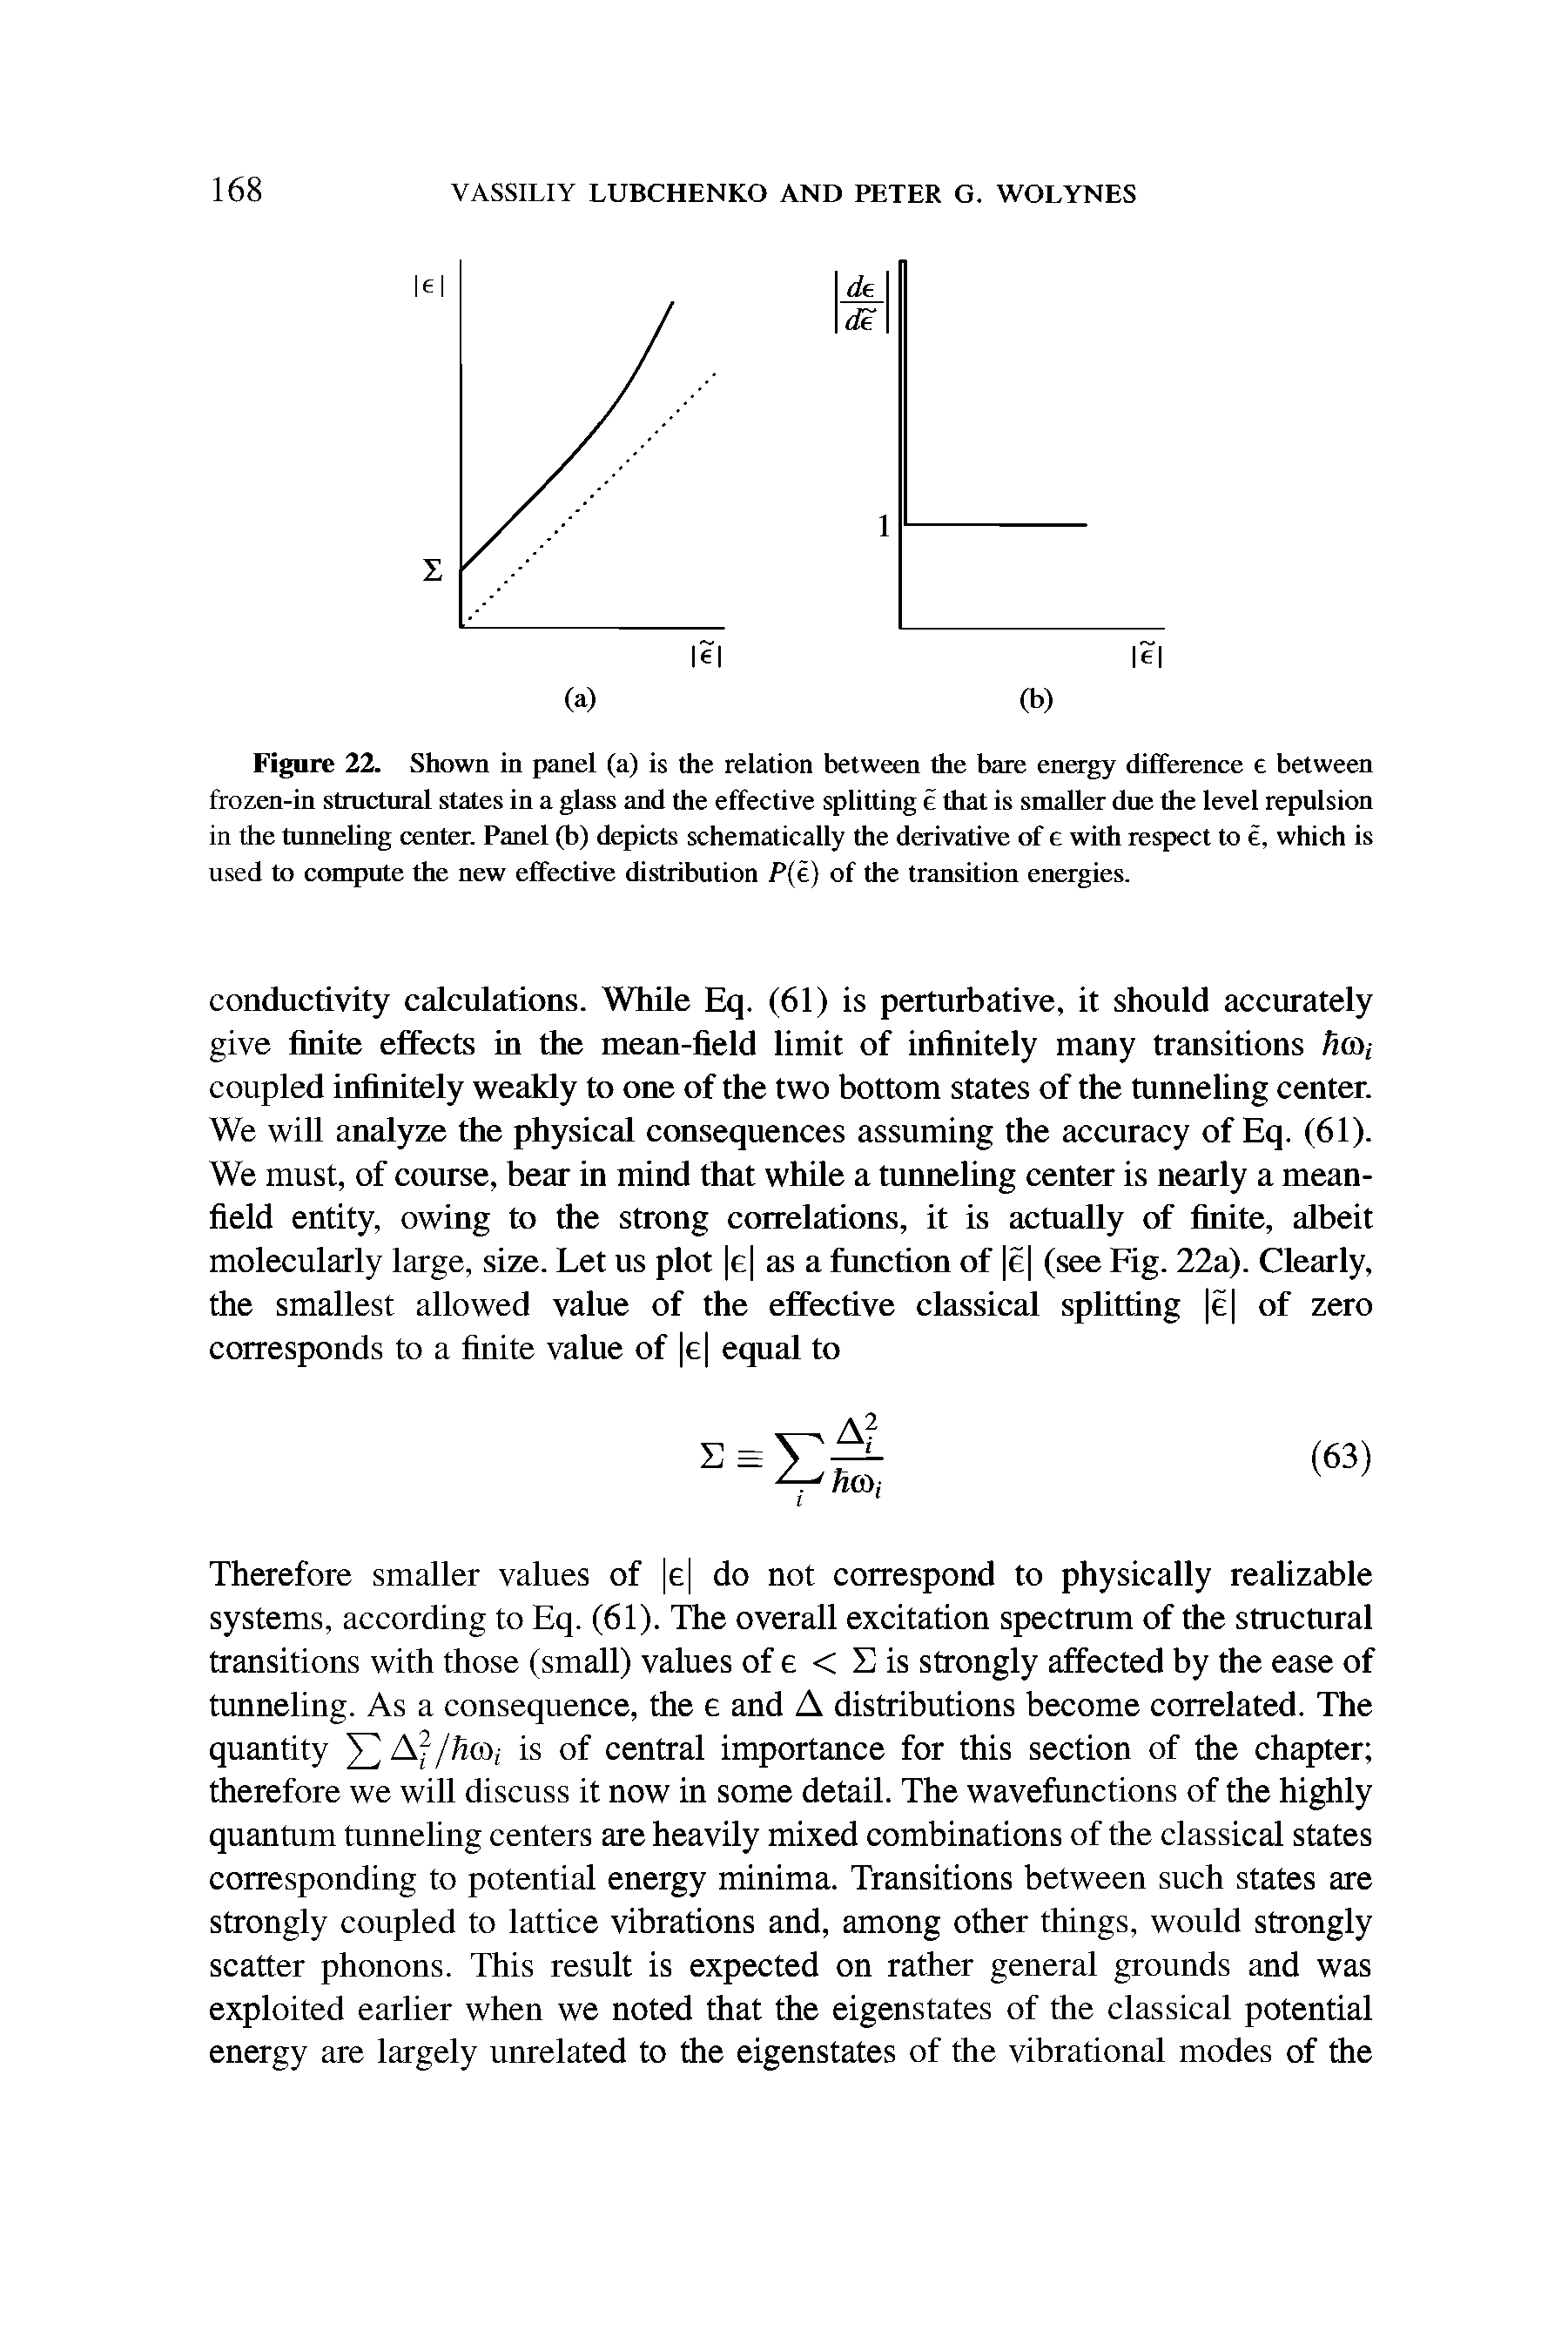 Figure 22. Shown in panel (a) is the relation between the bare energy difference e between frozen-in structural states in a glass and the effective splitting e that is smaller due the level repulsion in the tunnehng center. Panel (b) depicts schematically the derivative of e with respect to e, which is used to compute the new effective distribution P(e) of the transition energies.